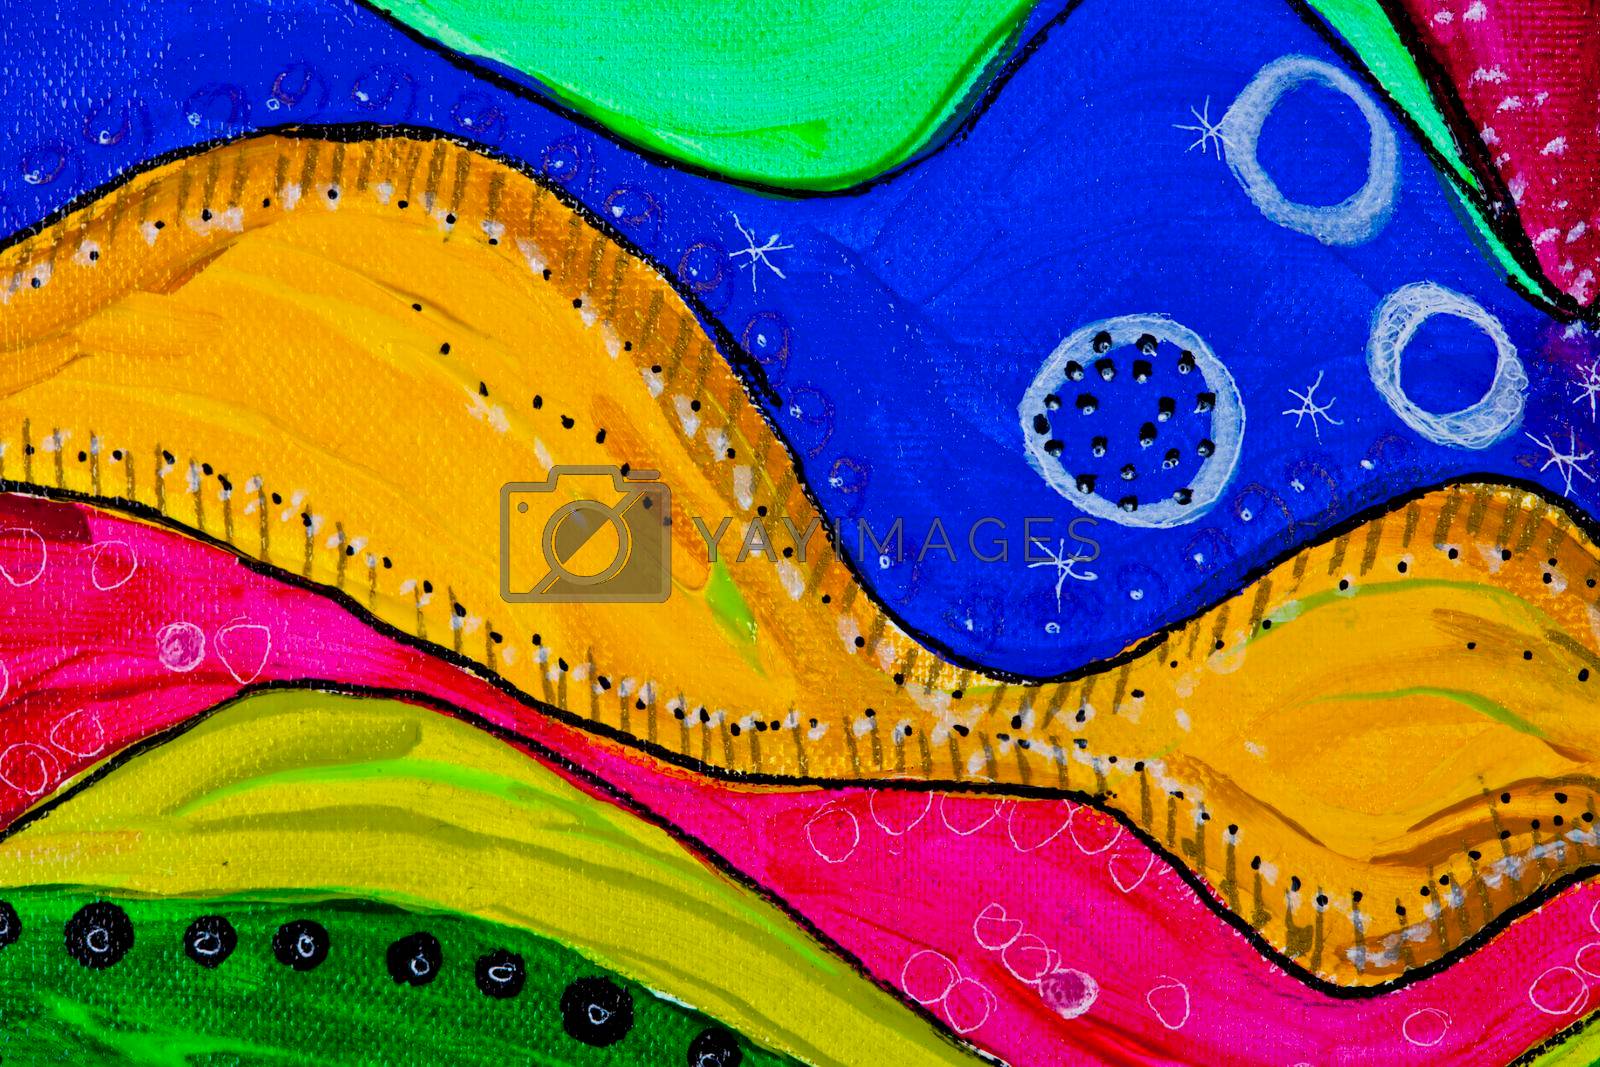 Blue, yellow, red, green and pink shades colored texture background. Decorative art.